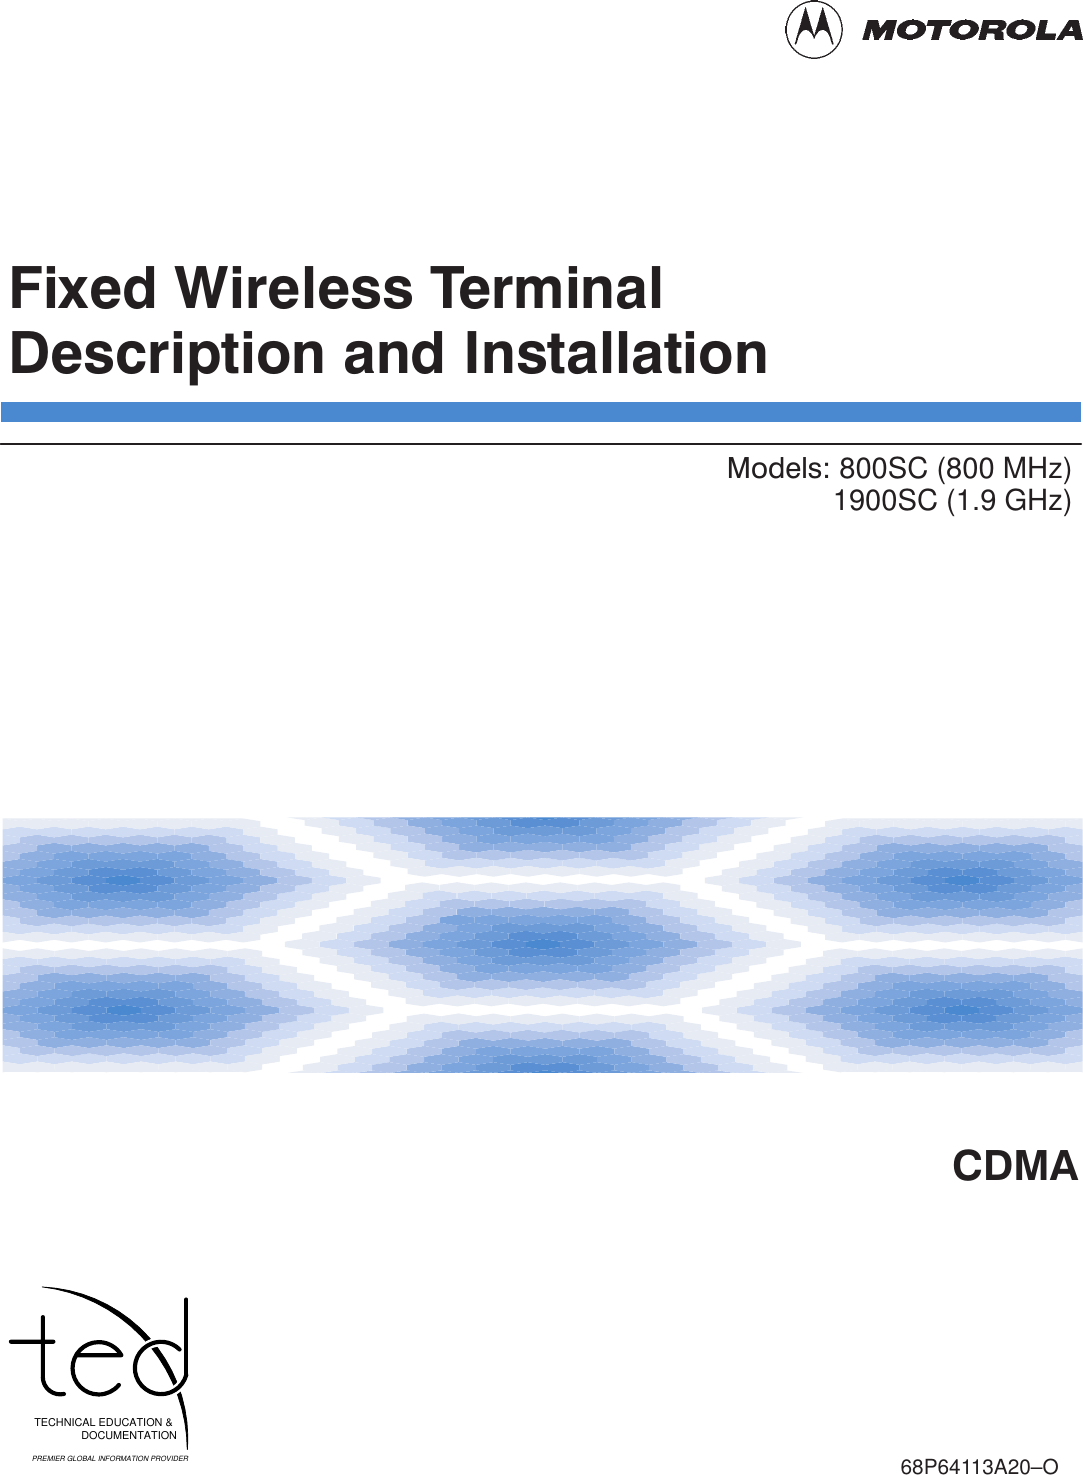 Fixed Wireless TerminalDescription and InstallationCDMAModels: 800SC (800 MHz) 1900SC (1.9 GHz)68P64113A20–OTECHNICAL EDUCATION &amp;DOCUMENTATIONPREMIER GLOBAL INFORMATION PROVIDER